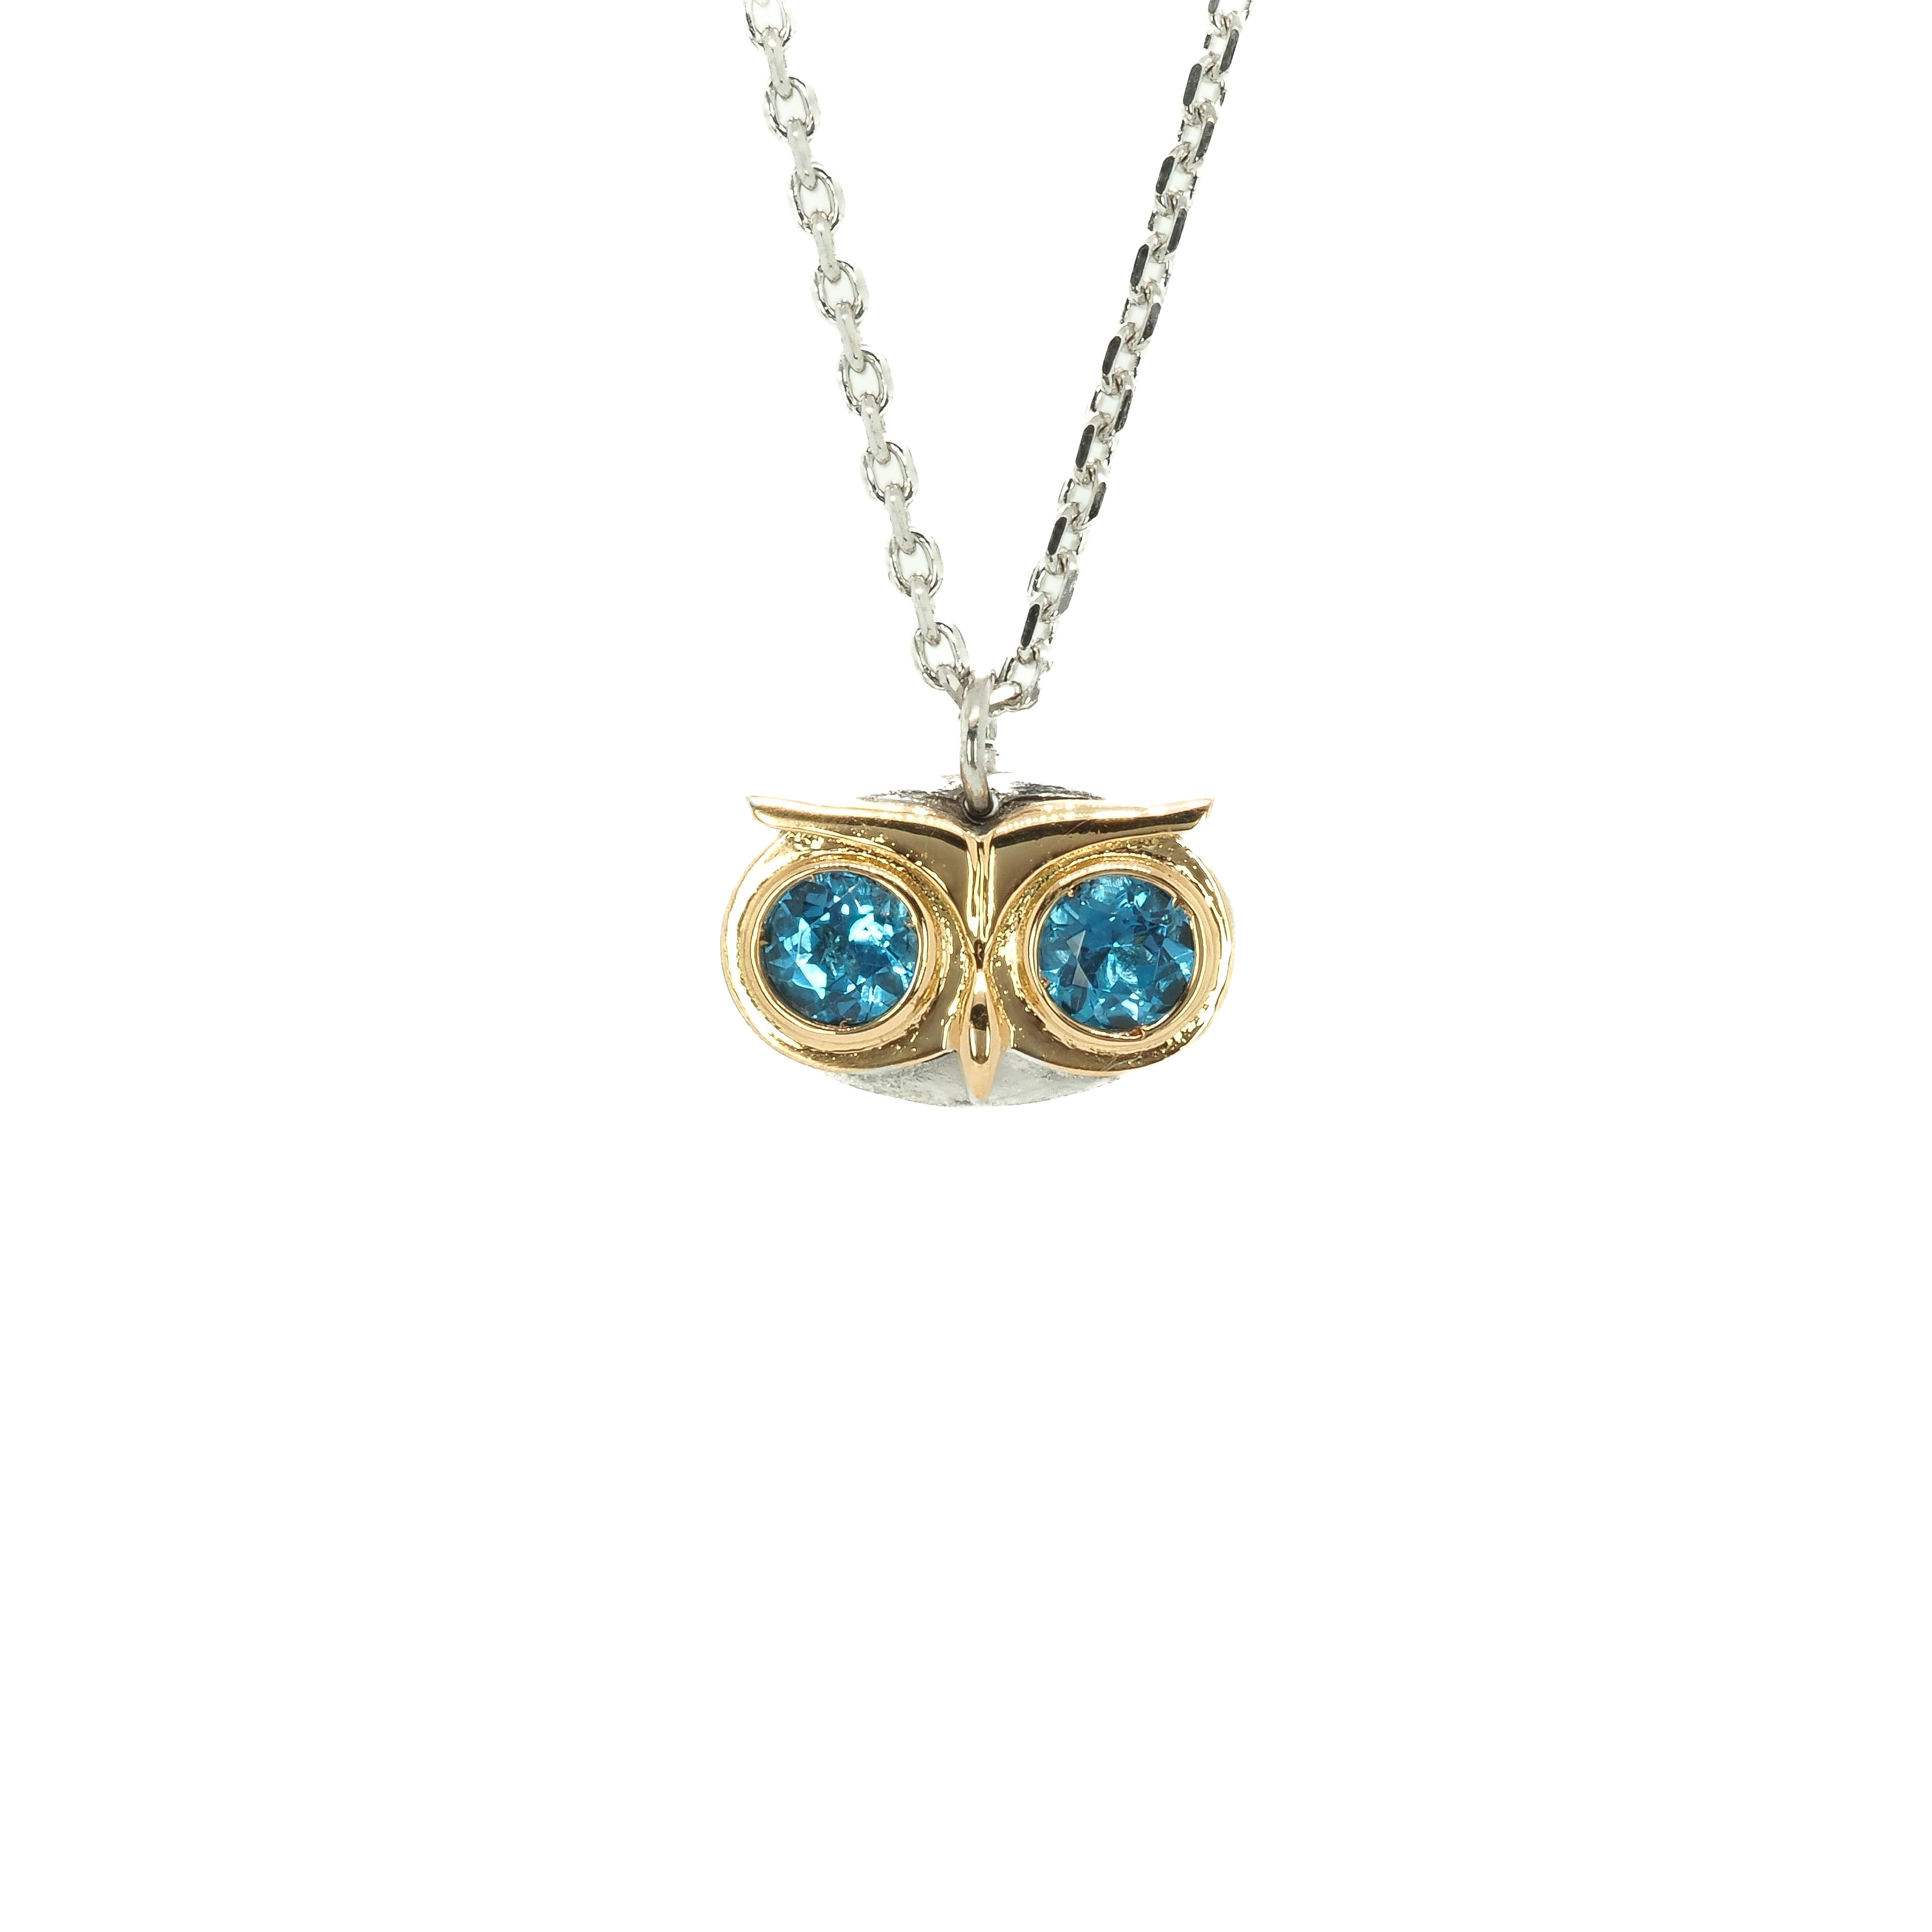 Taru Jewelry captivating owl necklace, crafted from 18K gold and sterling silver, captures the essence of the wise and mysterious bird. The owl&#39;s eyes are set with sparkling blue topaz, adding a touch of color and elegance to the piece. The blue topaz represents loyalty, righteousness, and the ability to improve communication and find the perfect pathways to success.